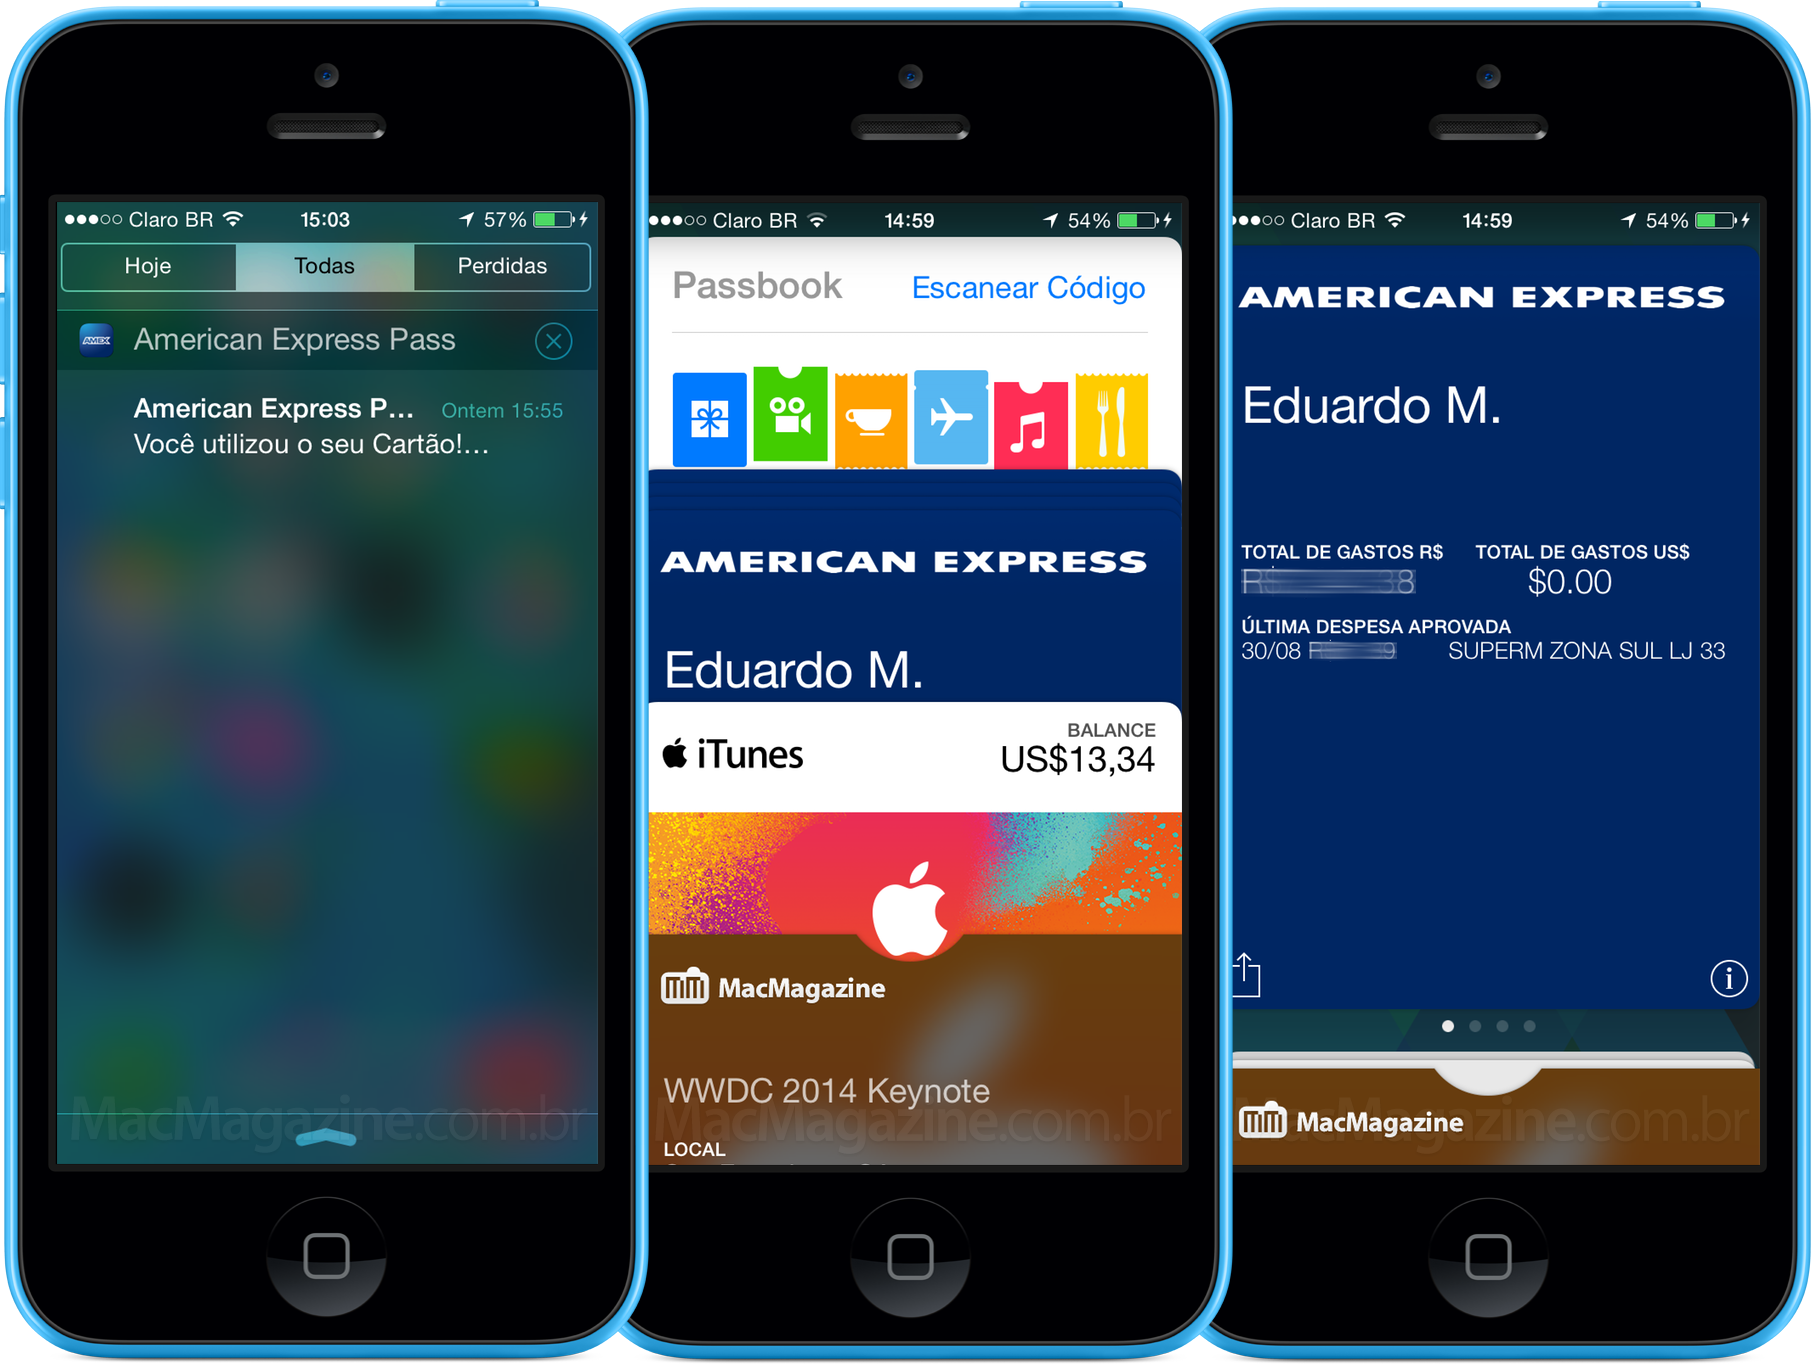 AMEX in the Passbook